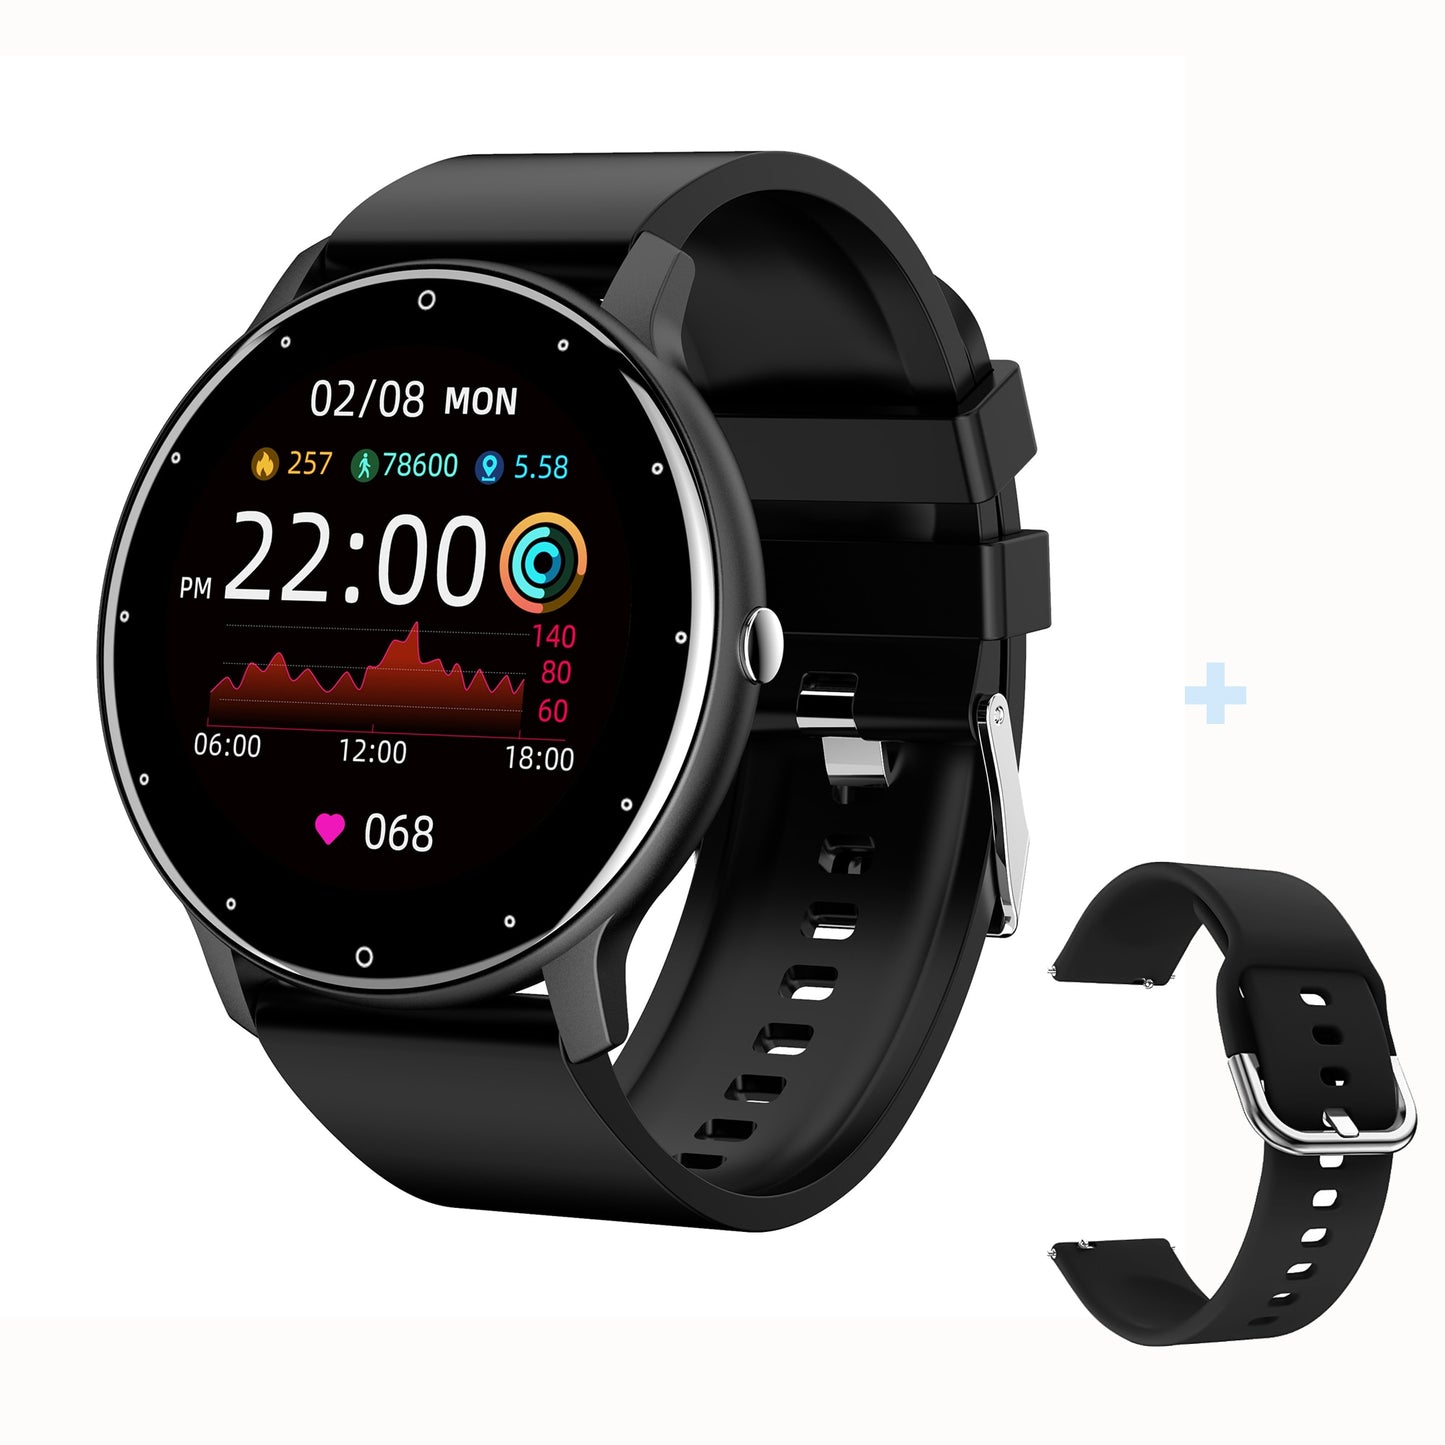 CanMixs 2022 New Smart Watch Women Men Lady Sport Fitness Smartwatch Sleep Heart Rate Monitor Waterproof Watches For IOS Android